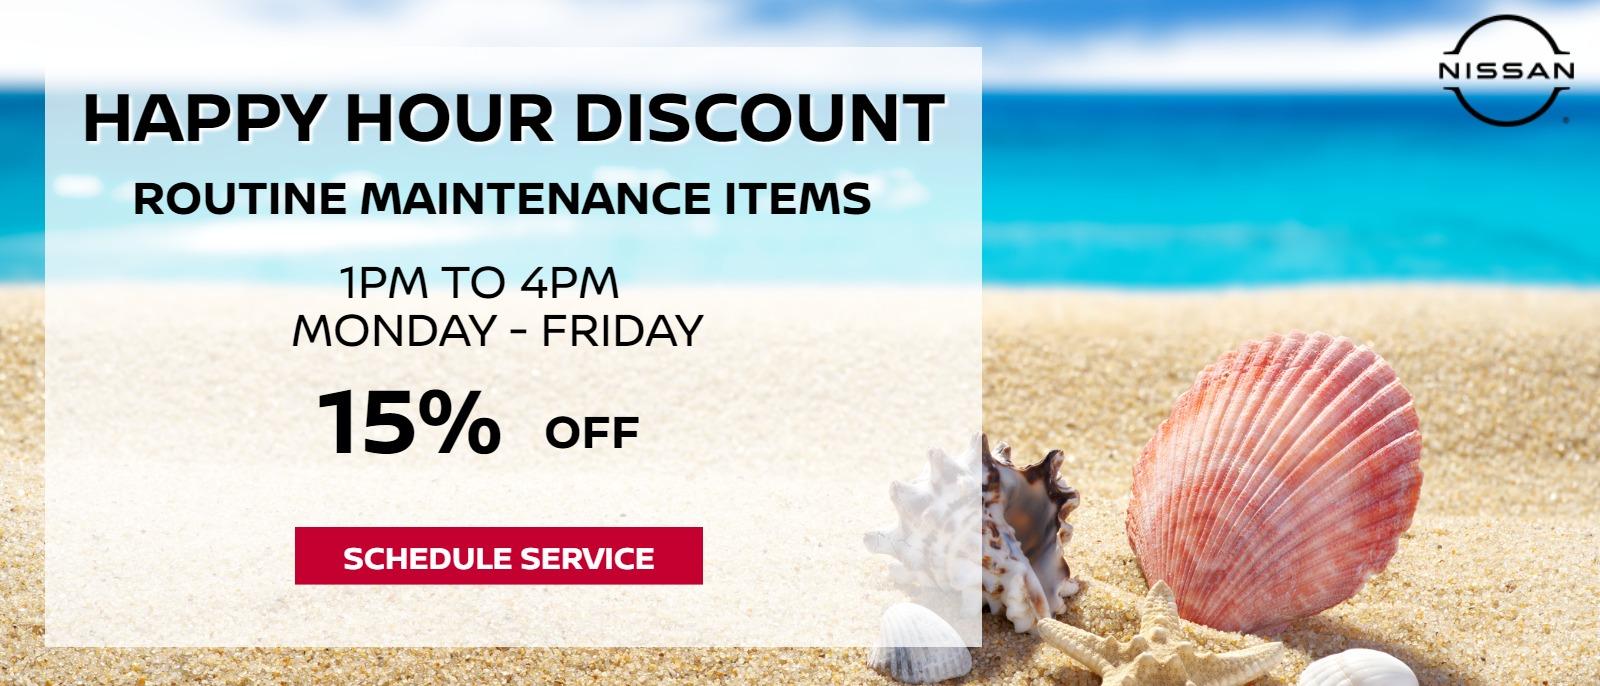 Happy Hour Discount
1pm to 4pm
Monday - Friday
Routine Maintenance Items
15% off